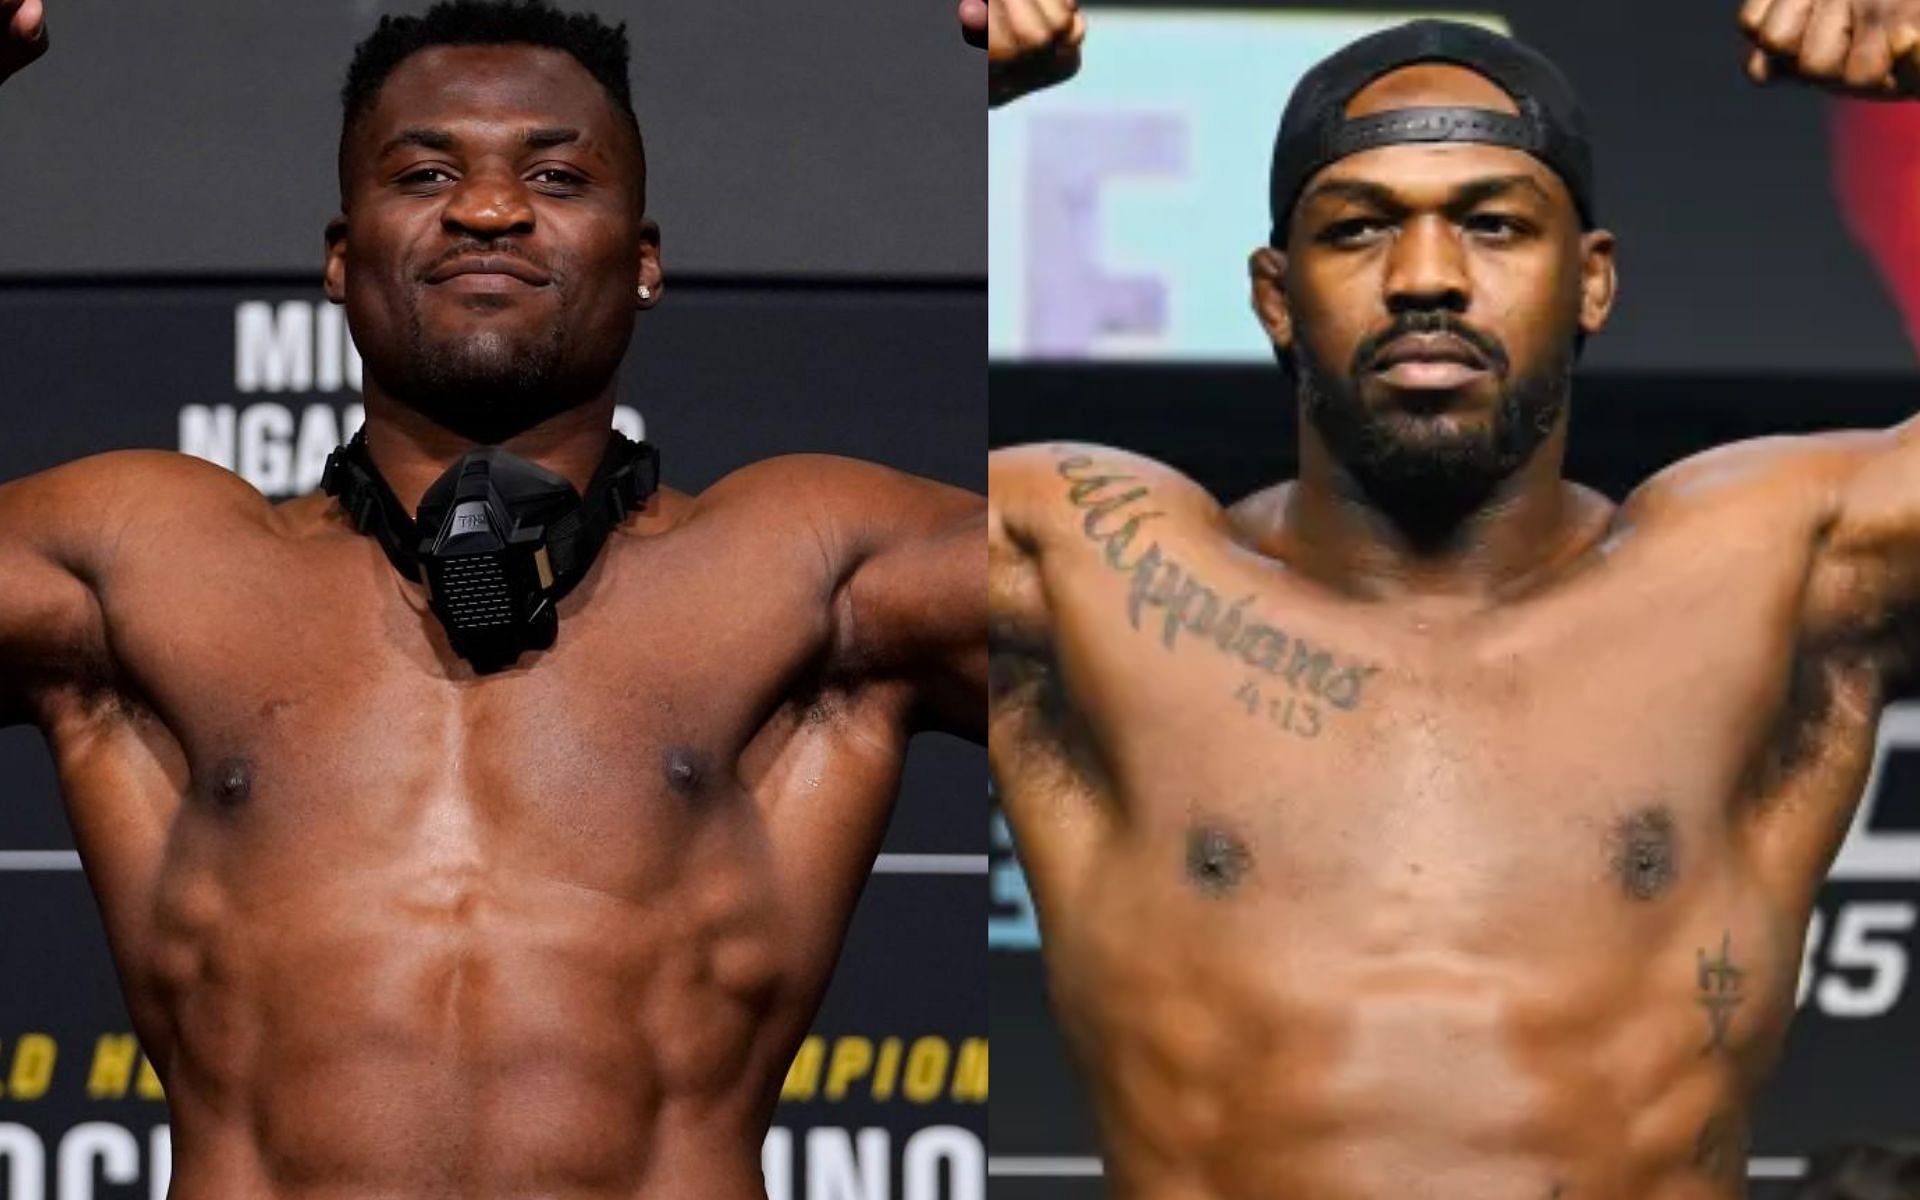 Francis Ngannou (left) and Jon Jones (right). [via Getty Images]